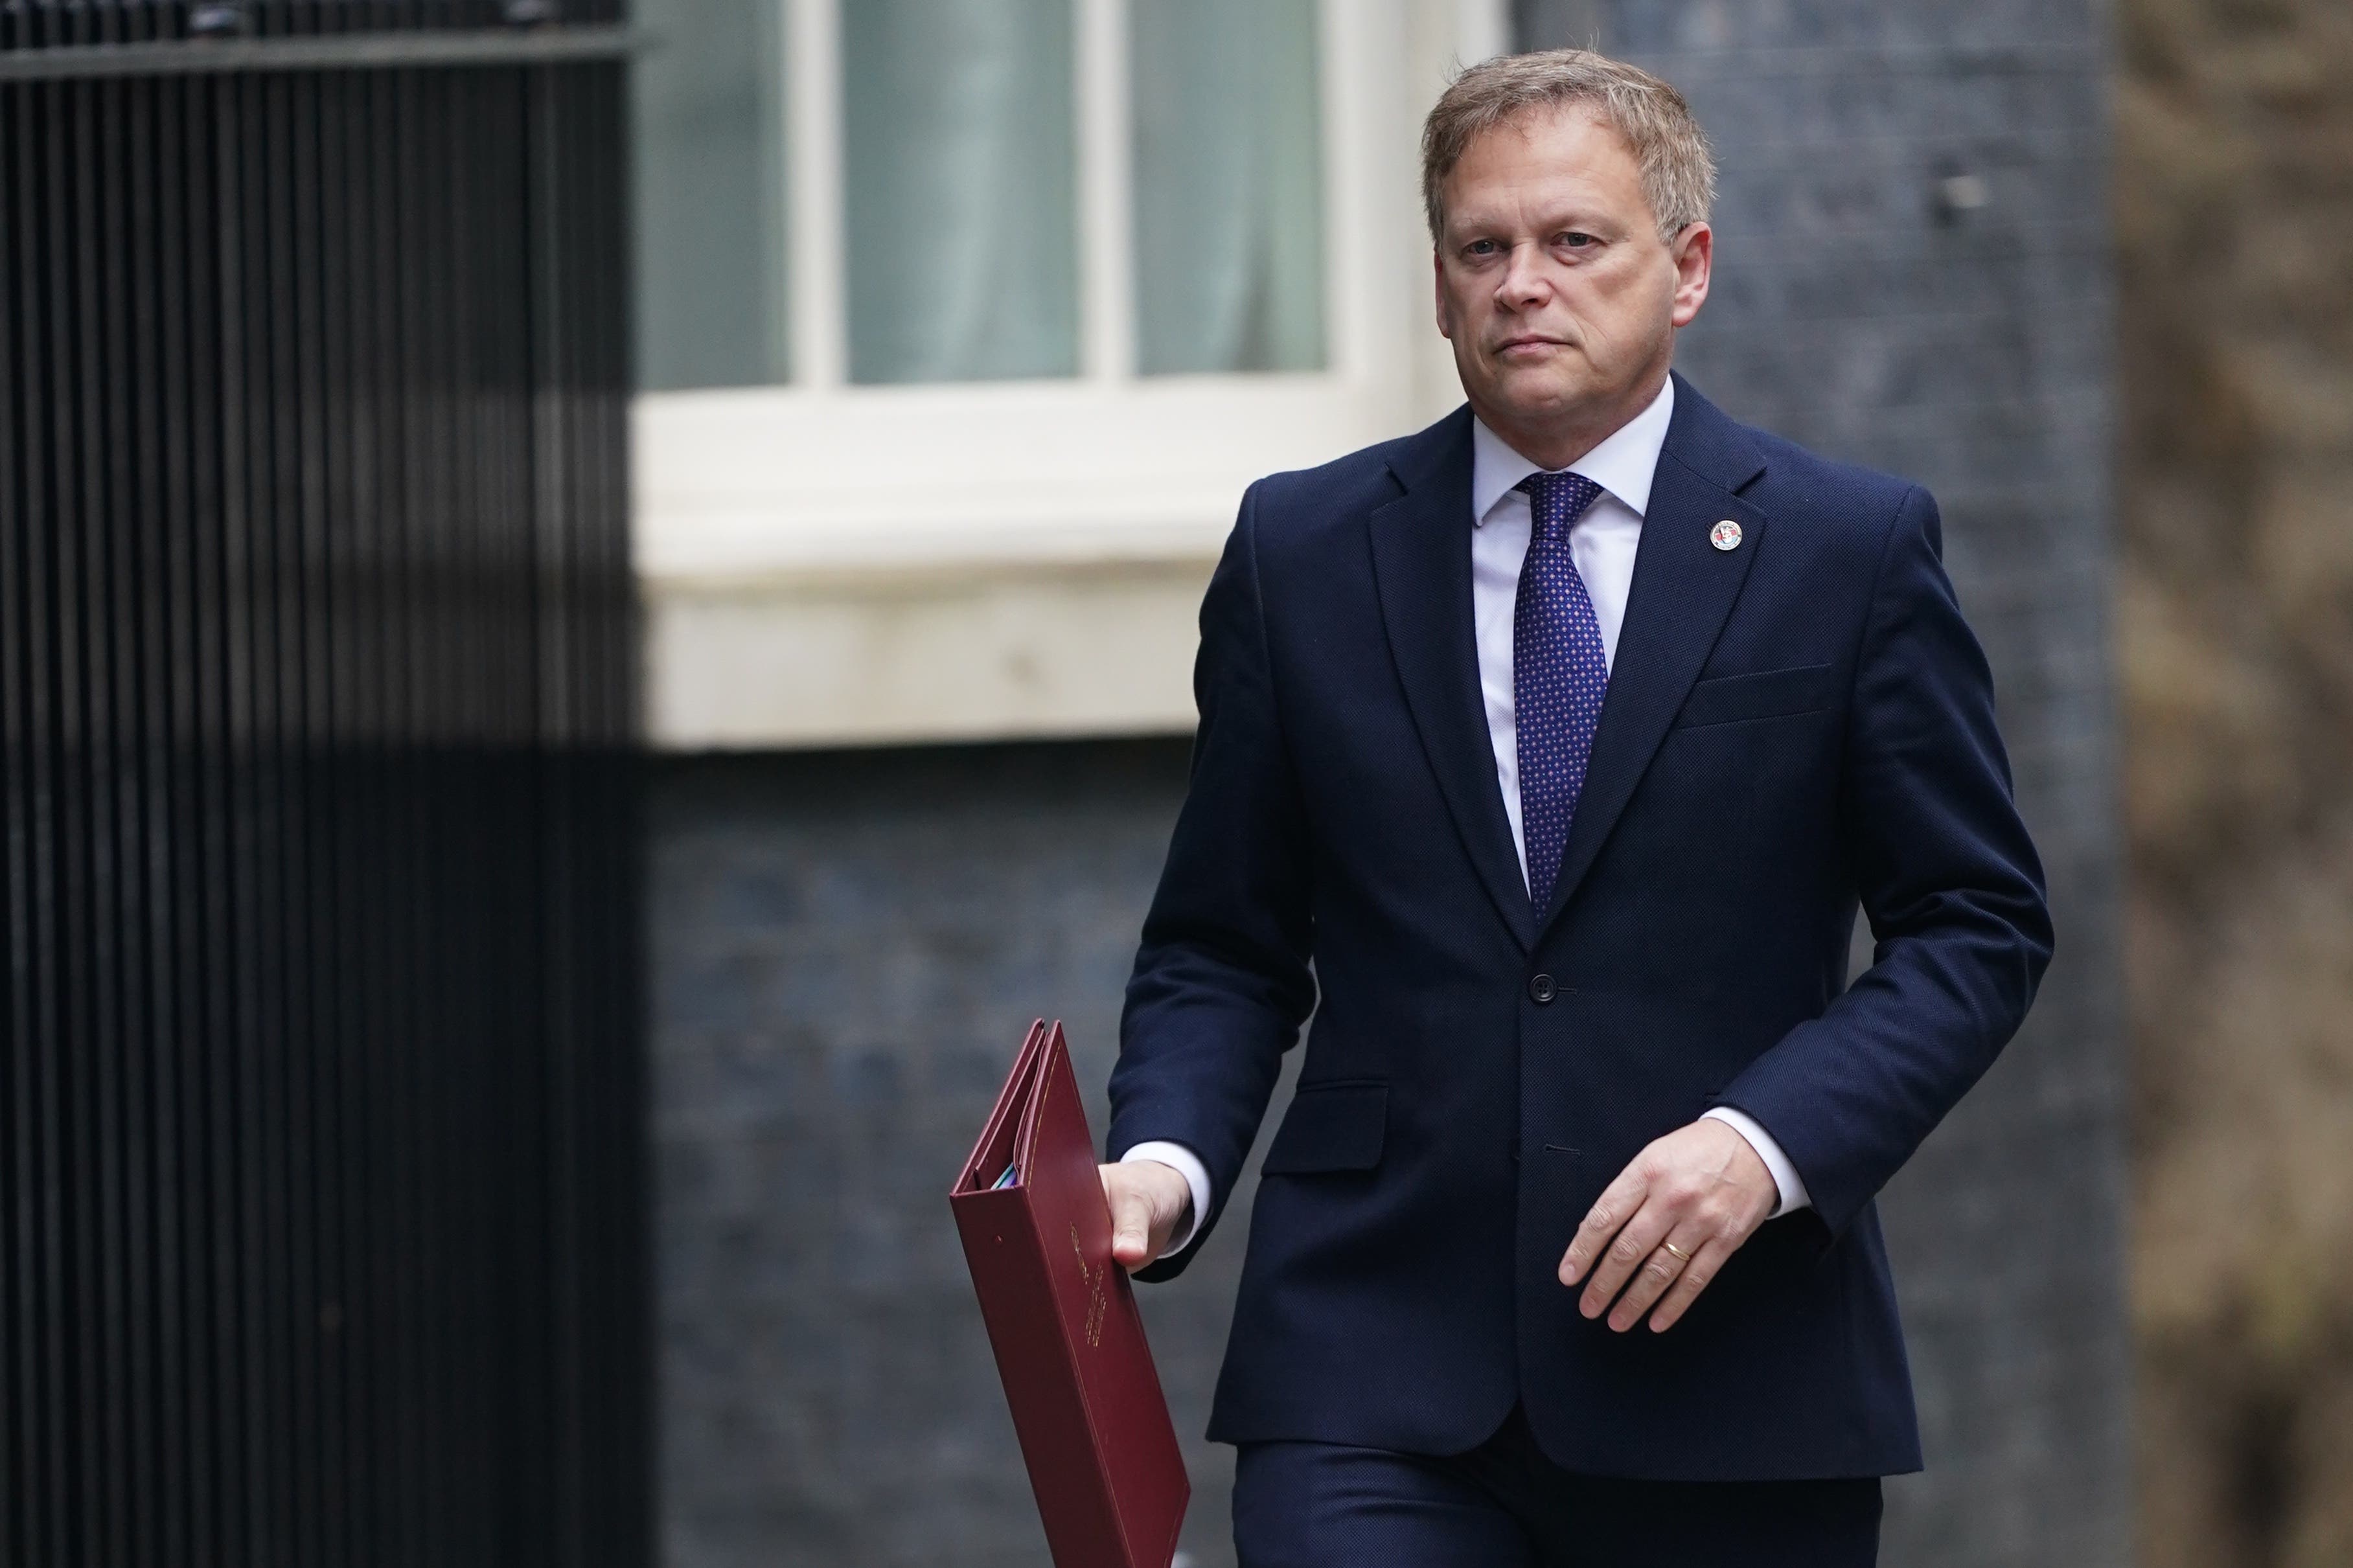 Defence Secretary Grant Shapps has had 10 front bench roles, half of them in the last four years